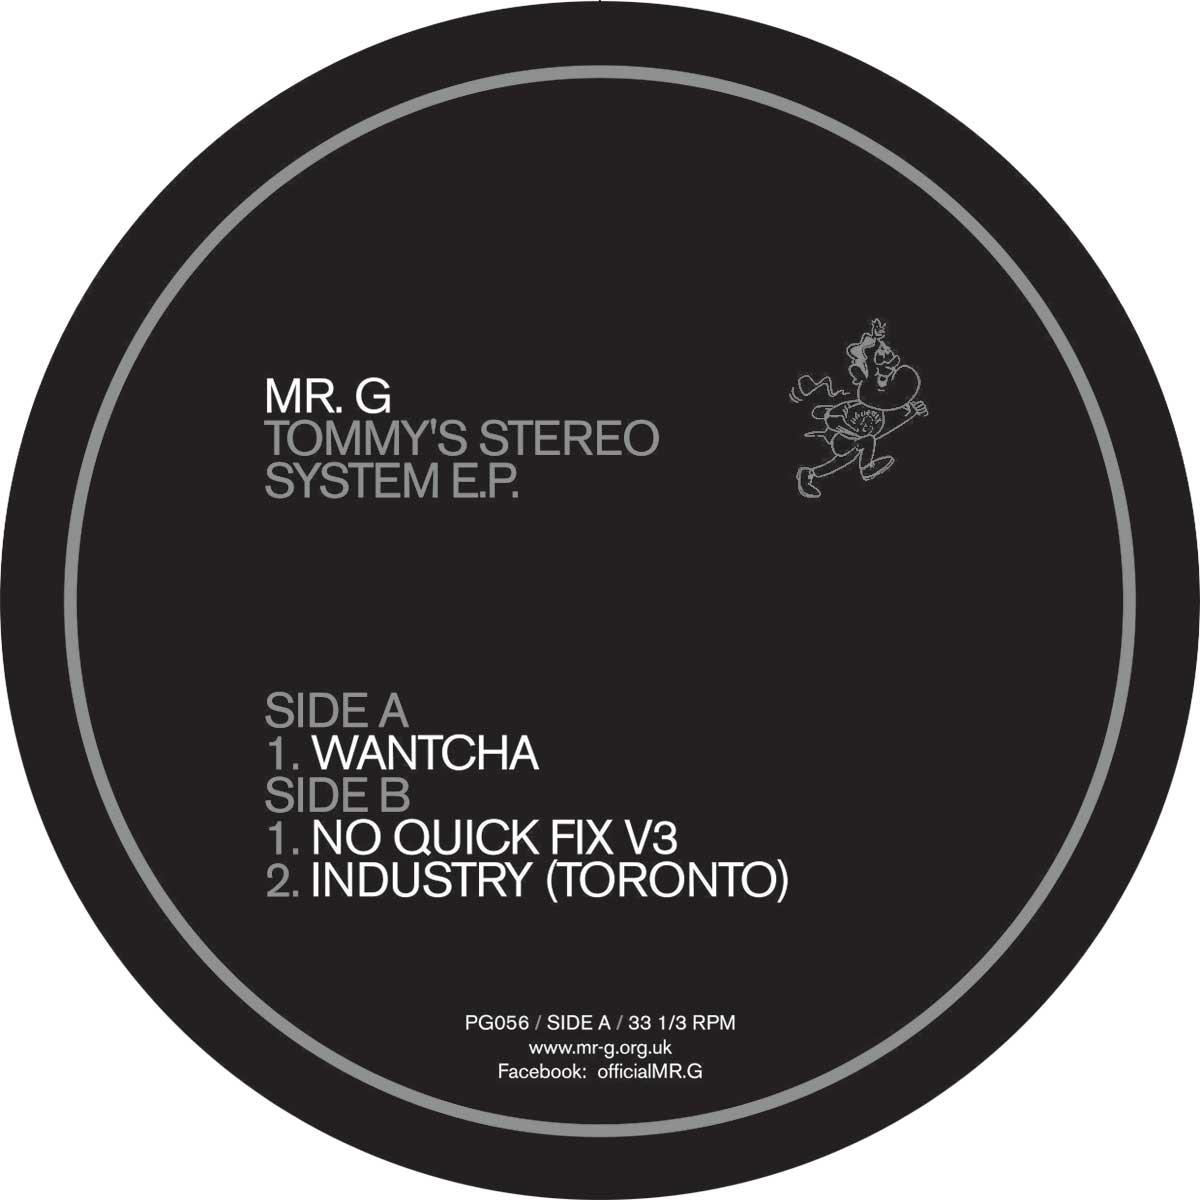 Mr. G/TOMMY'S STEREO SYSTEM EP 12"